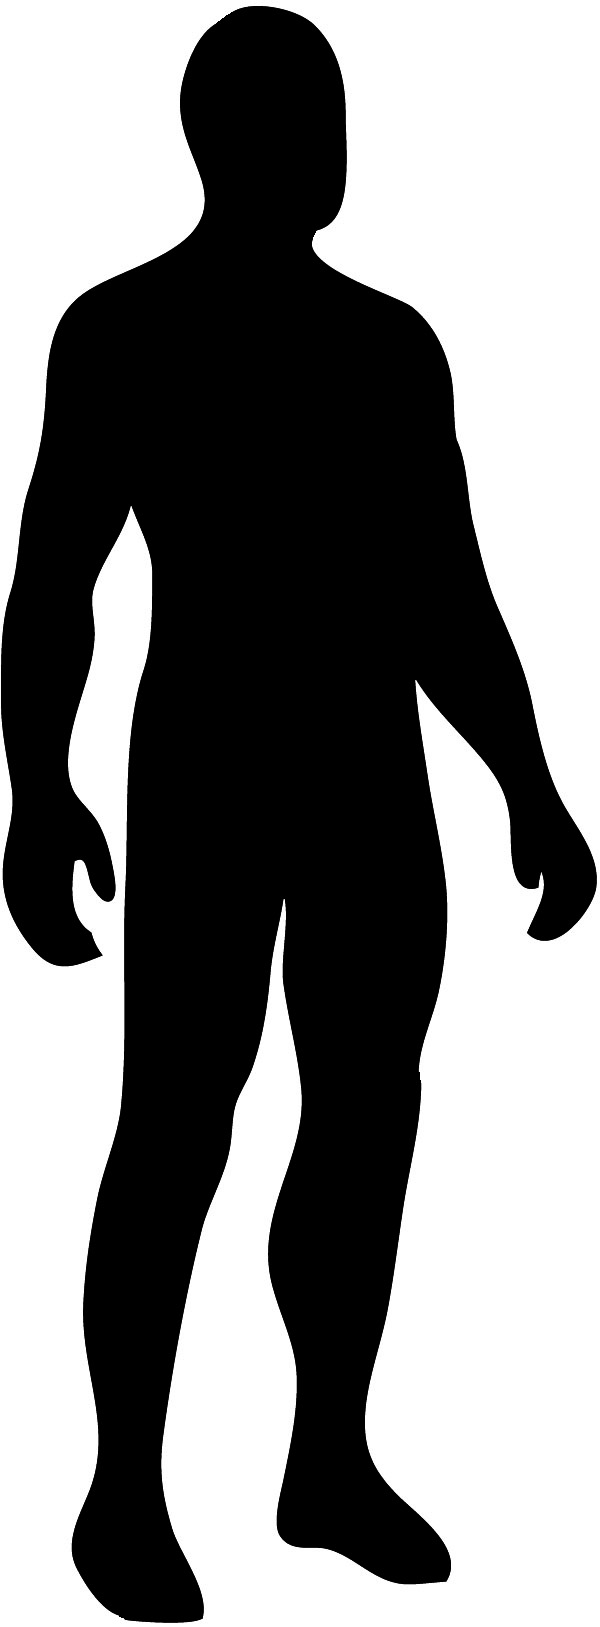 10 Silhouette Human Free Cliparts That You Can Download To You